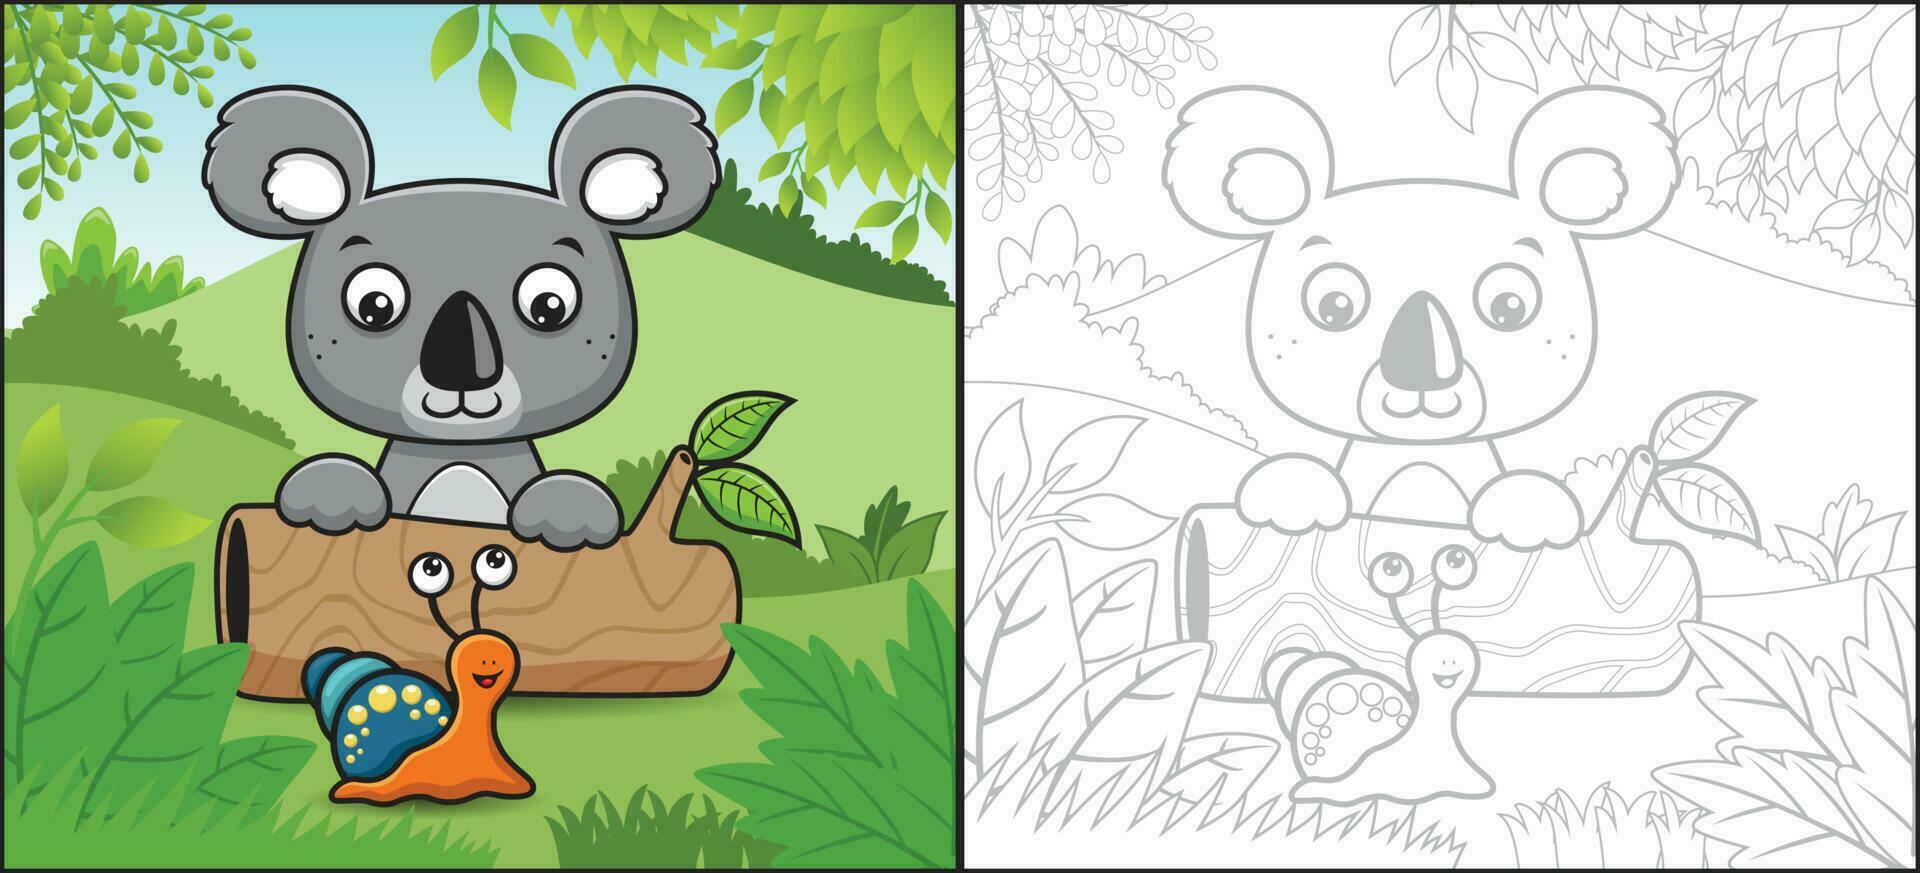 Cartoon of koala in tree trunk with funny snail in forest. Coloring book or page vector